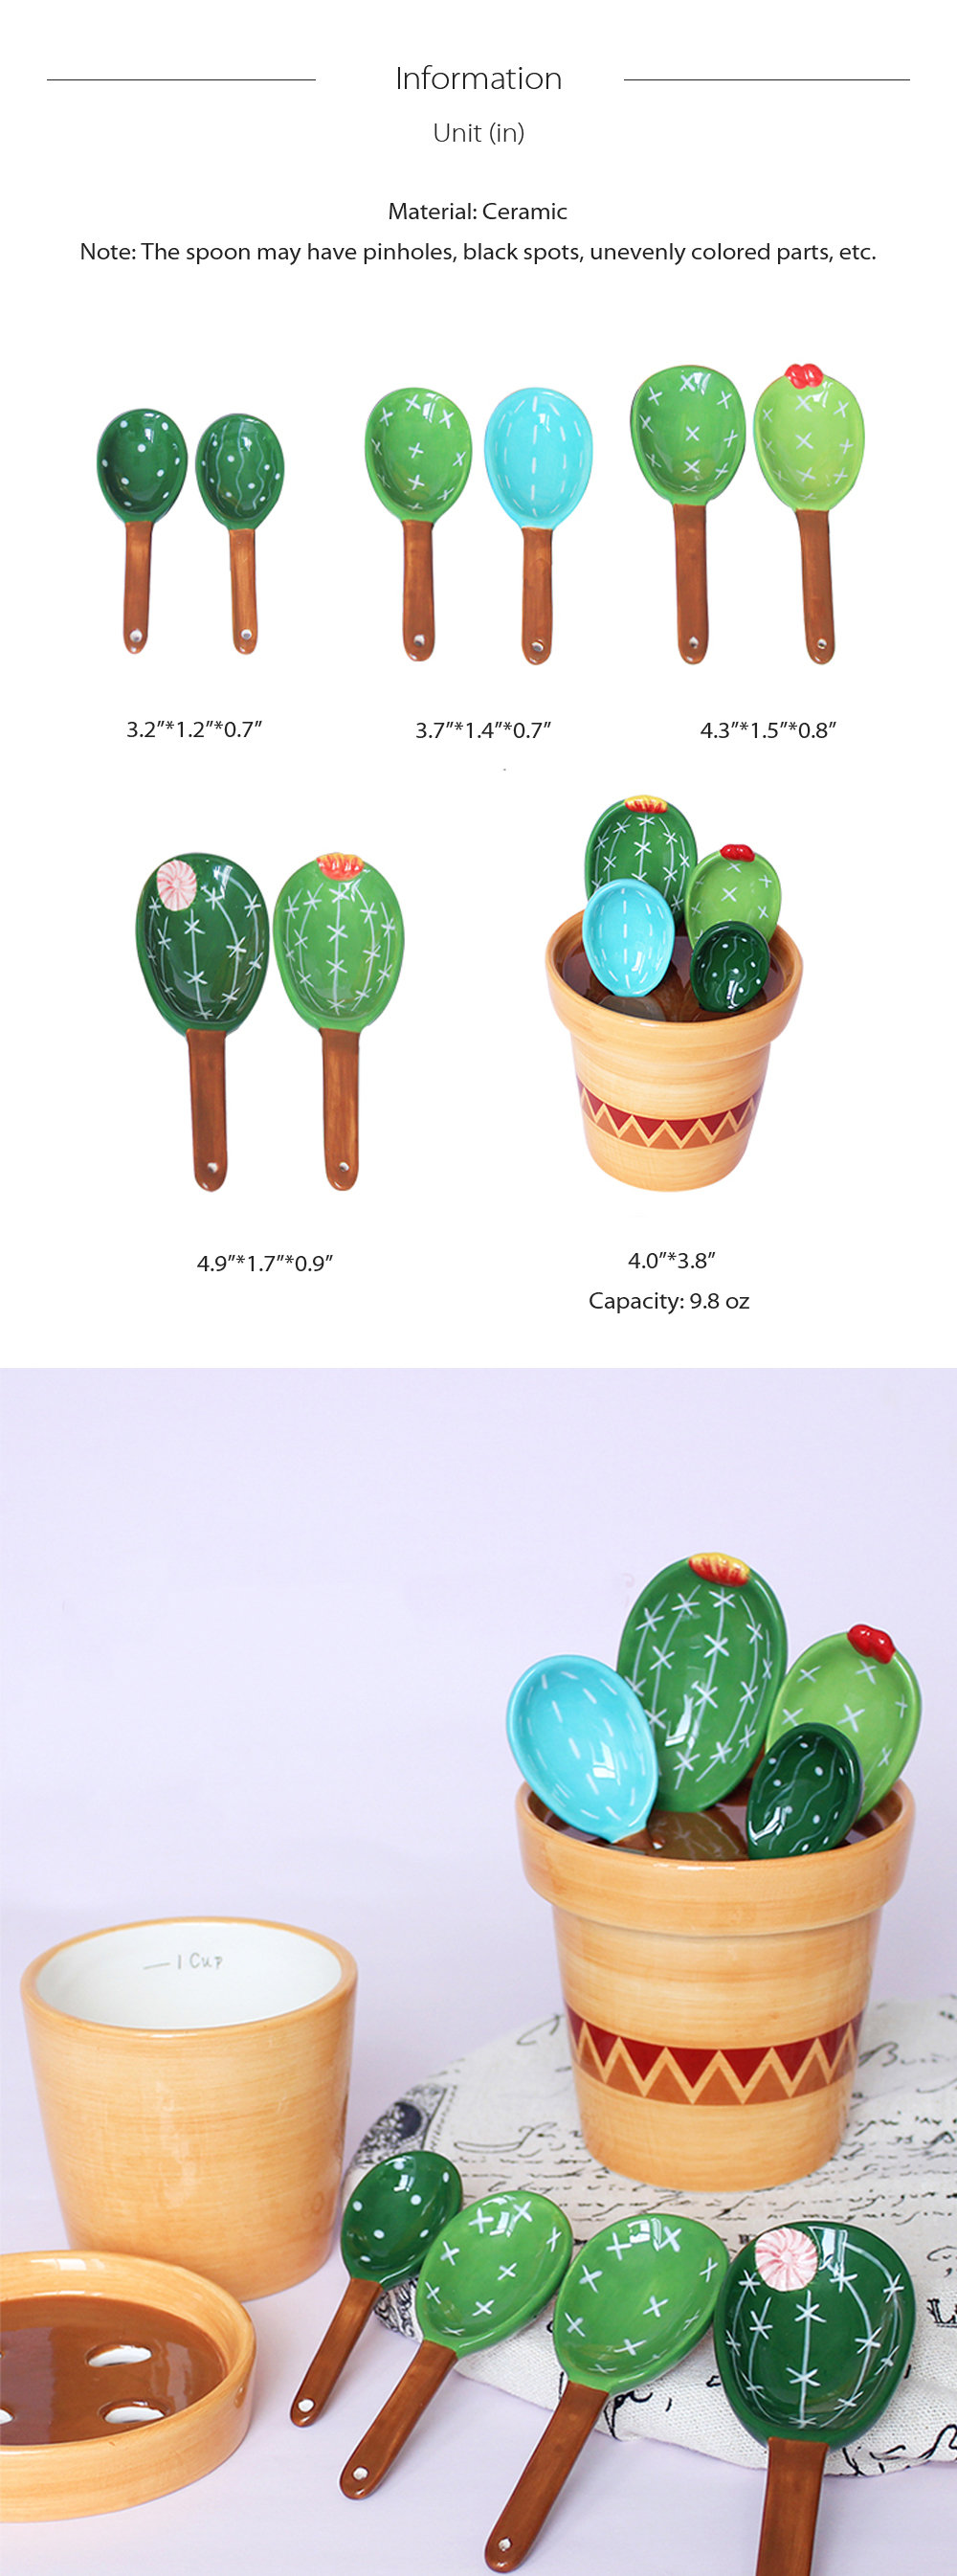 Cactus Measuring Cups And Spoons Set